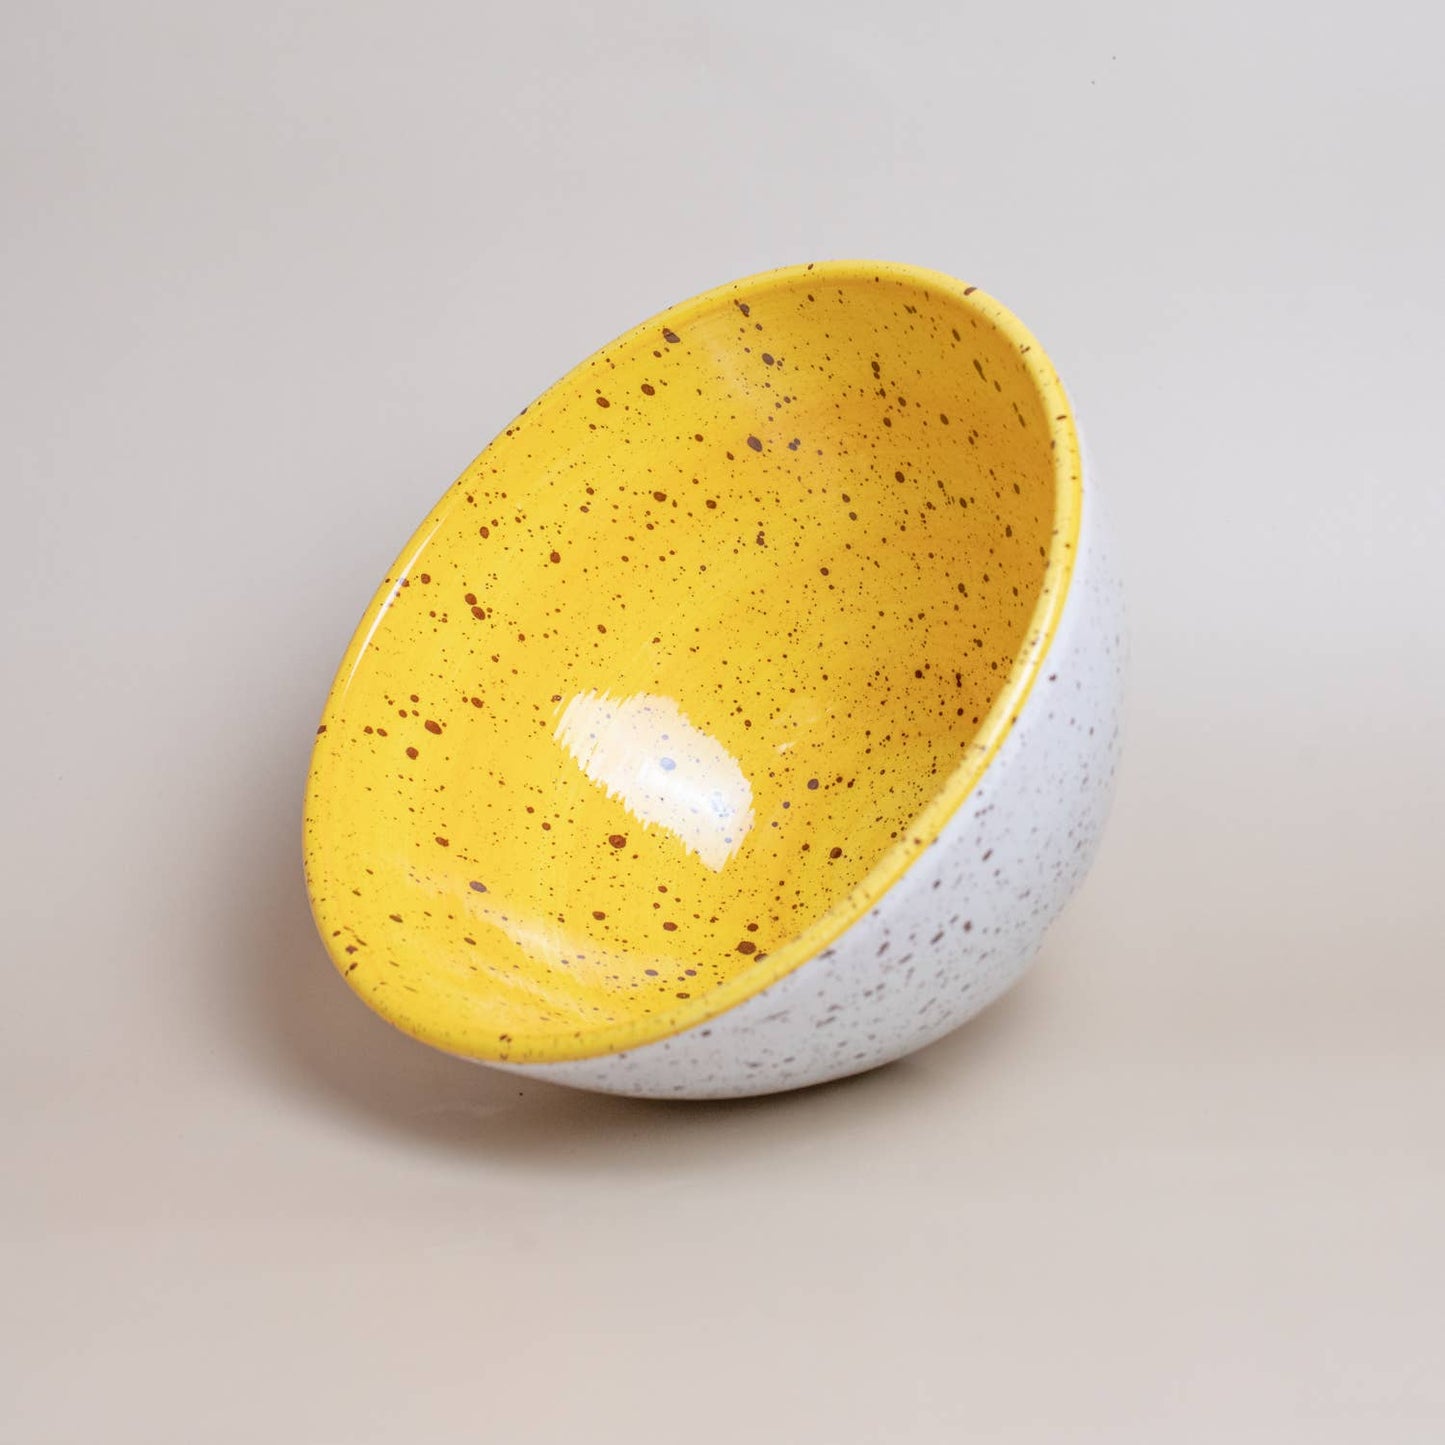 White ceramic bowl with Yellow interior tilted on its side